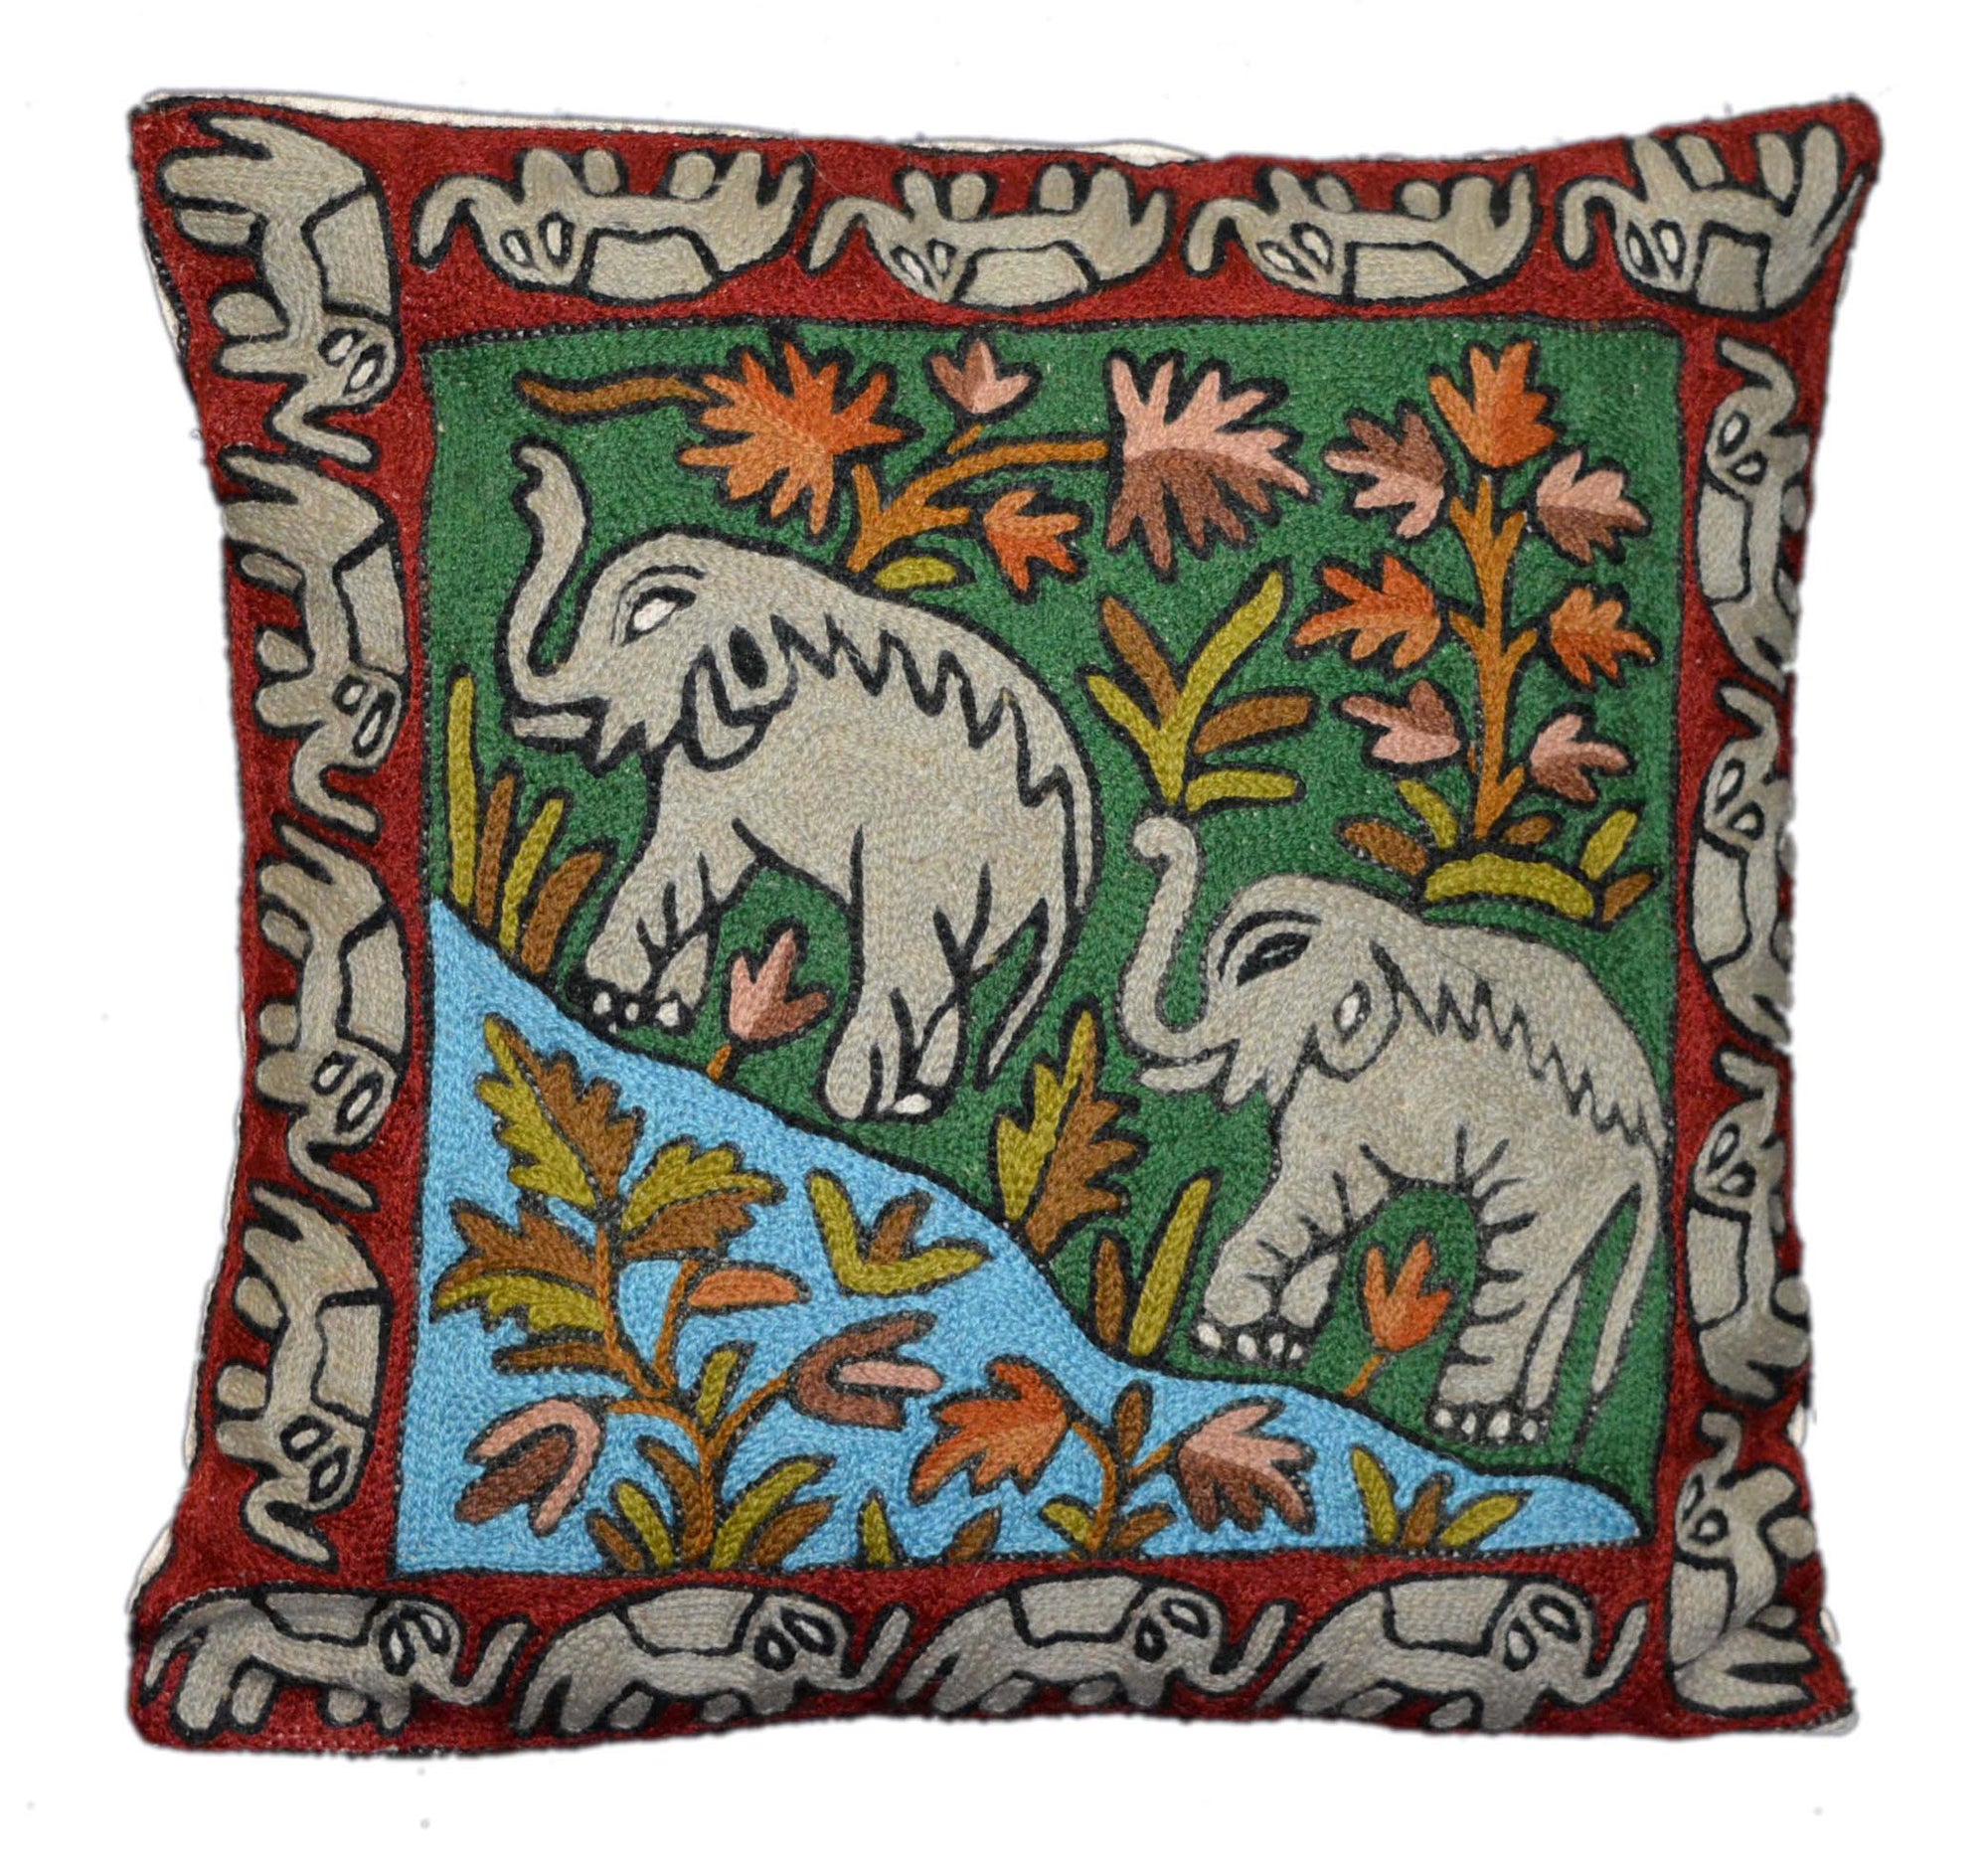 Crewel Wool Embroidered Cushion Throw Pillow Cover, Multicolor #CW1004